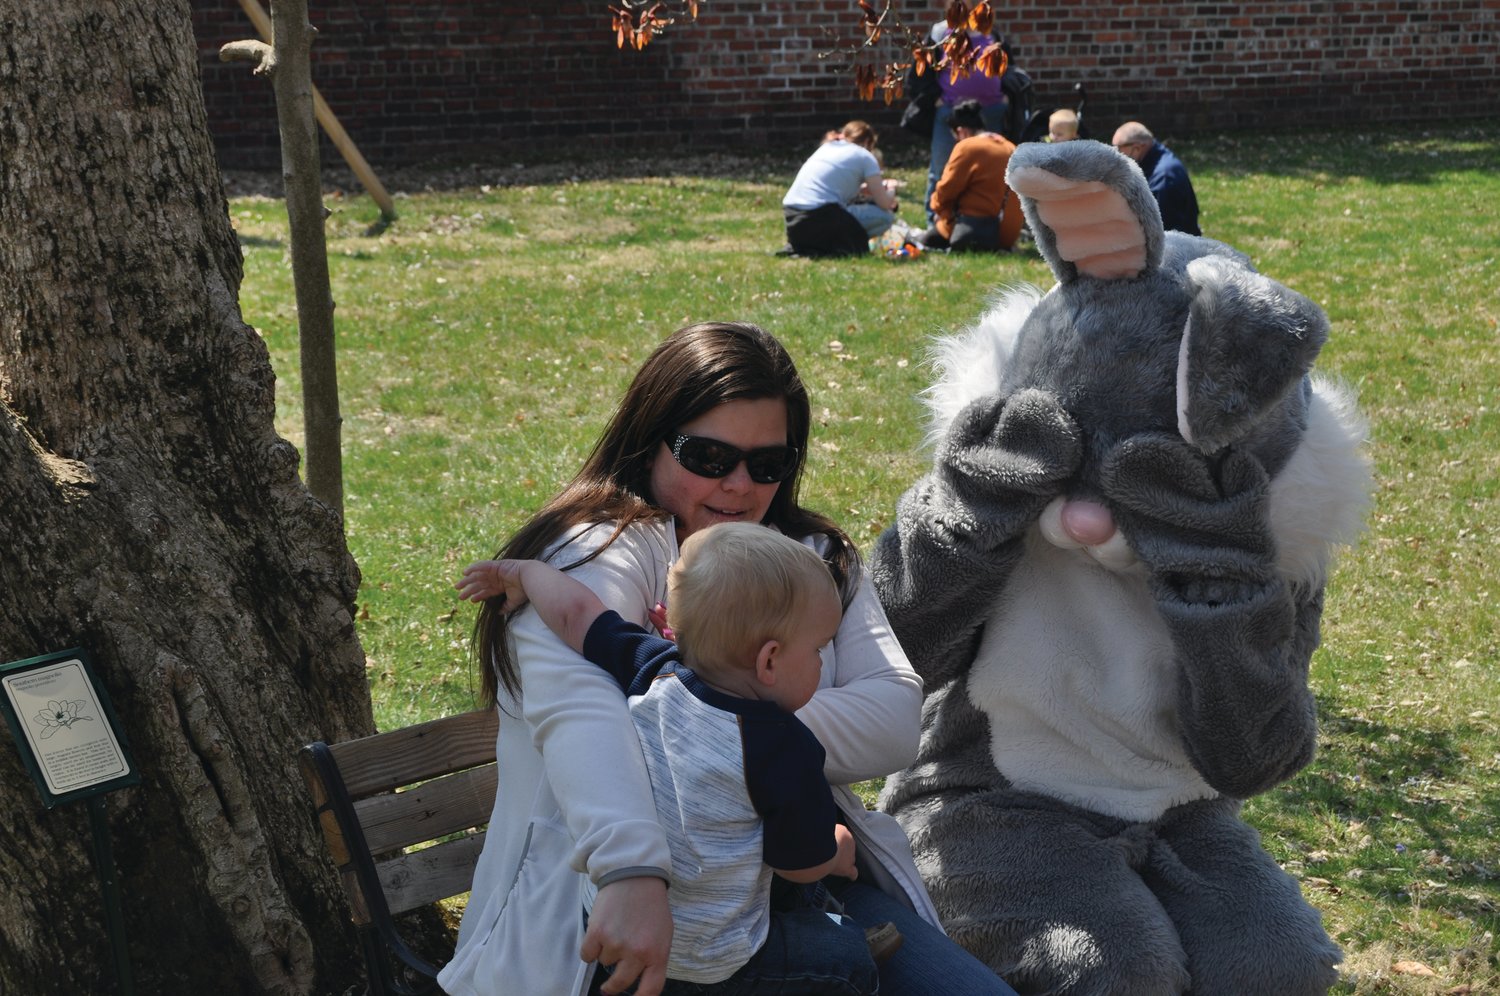 The Easter Bunny plays peek-a-boo with Hudson Stone, 1-1/2, held by Kelsey Stone on the grounds of the General Lew Wallace Study & Museum Sunday.